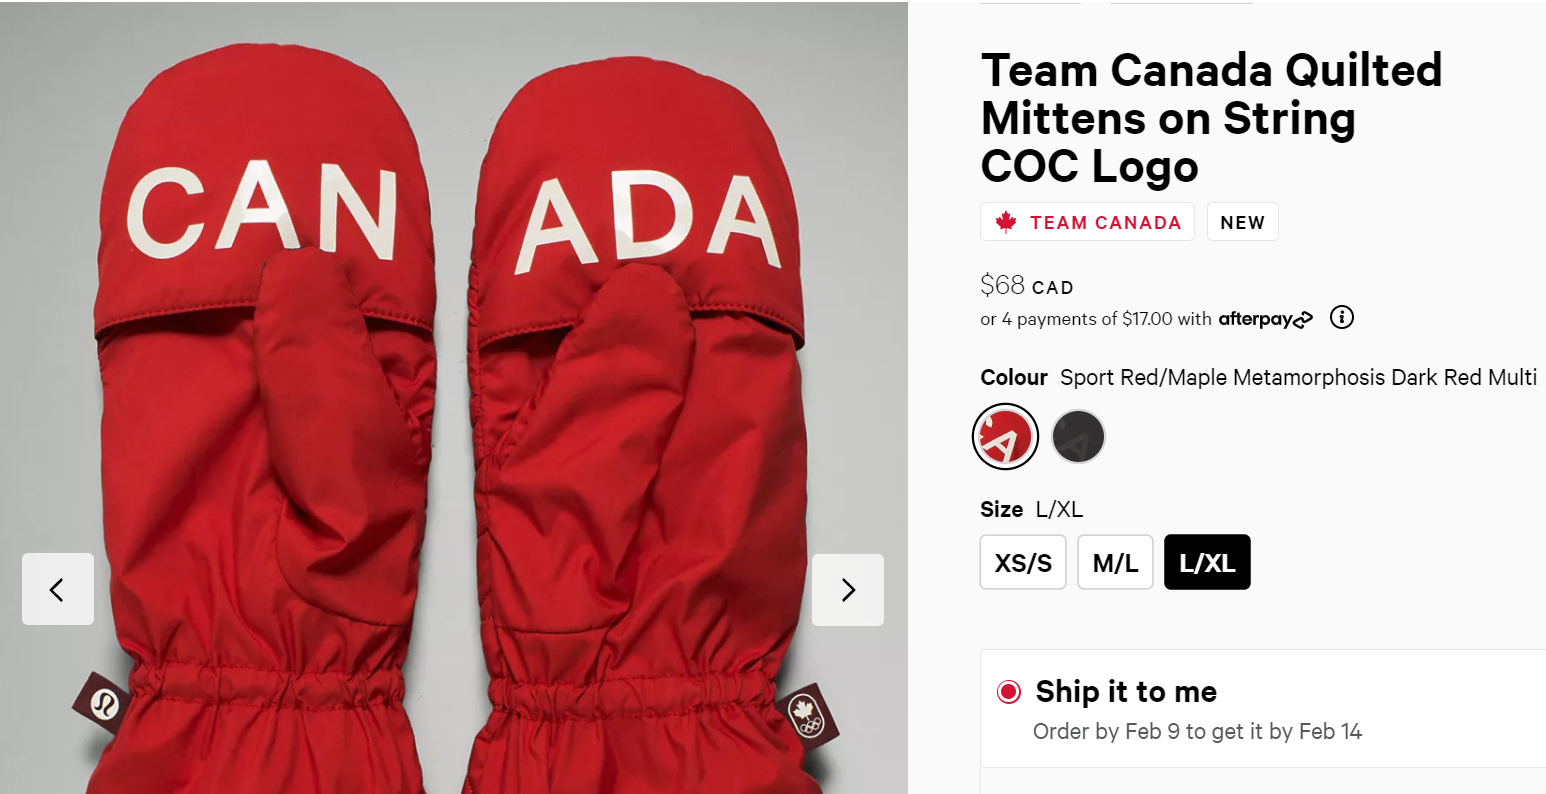 $68 for mittens? Team Canada fans cry foul over Lululemon prices for  official Olympic gear